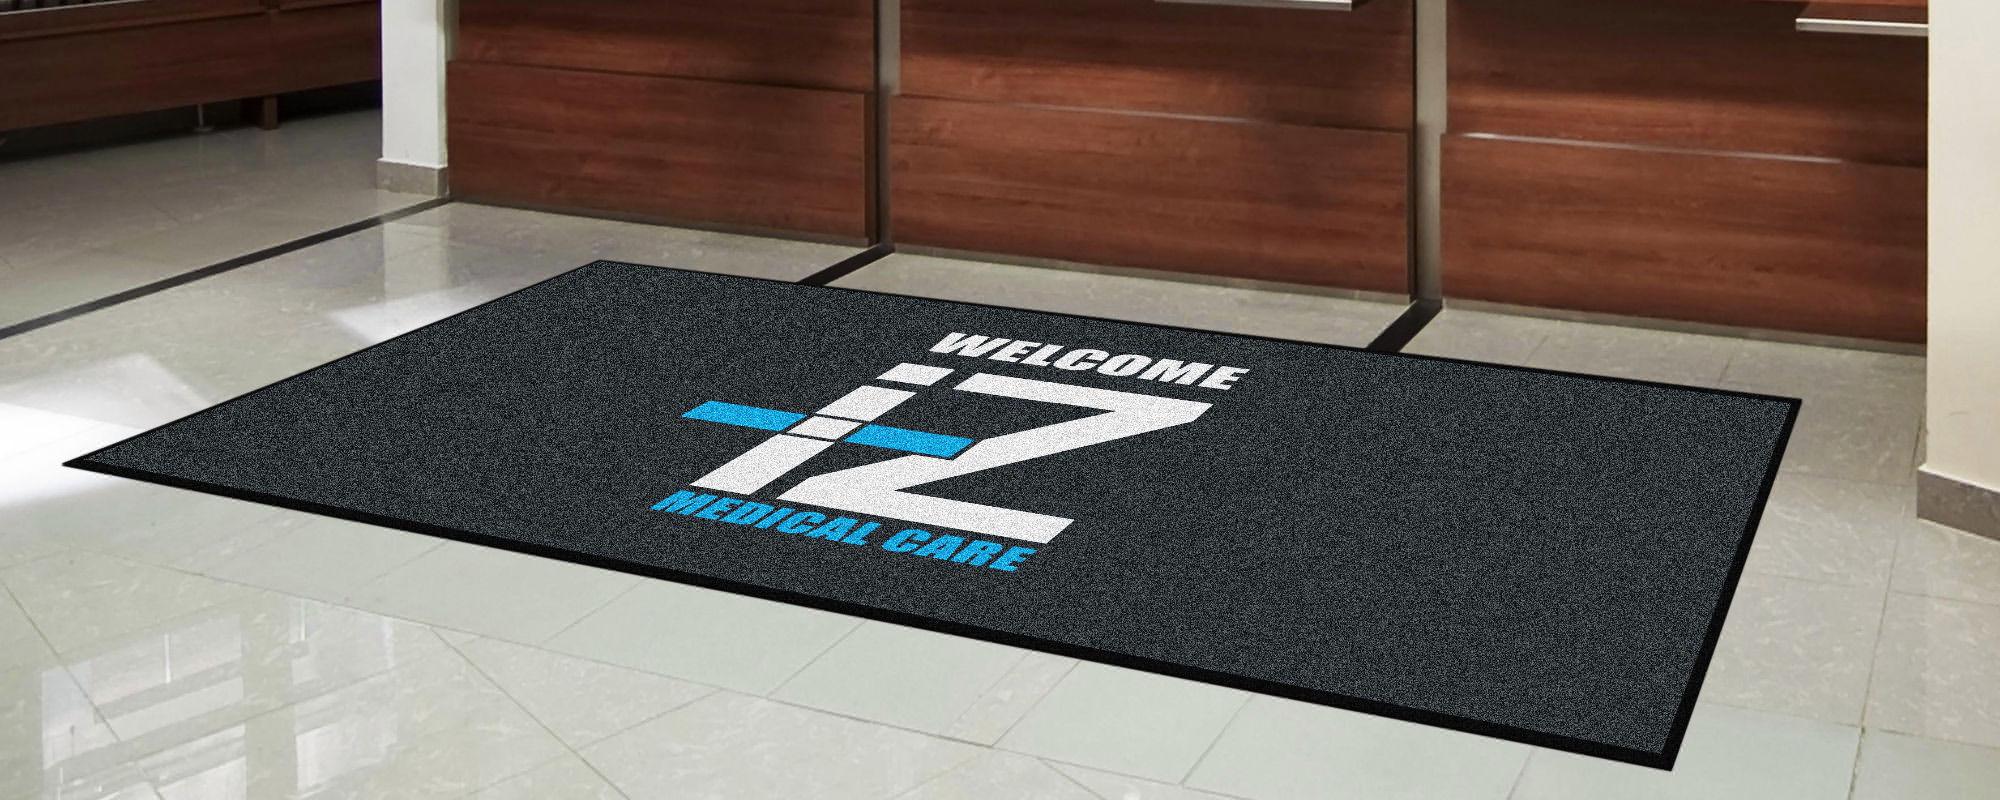 Manufacturers of printed entrance mats. Entrance mats with company logo